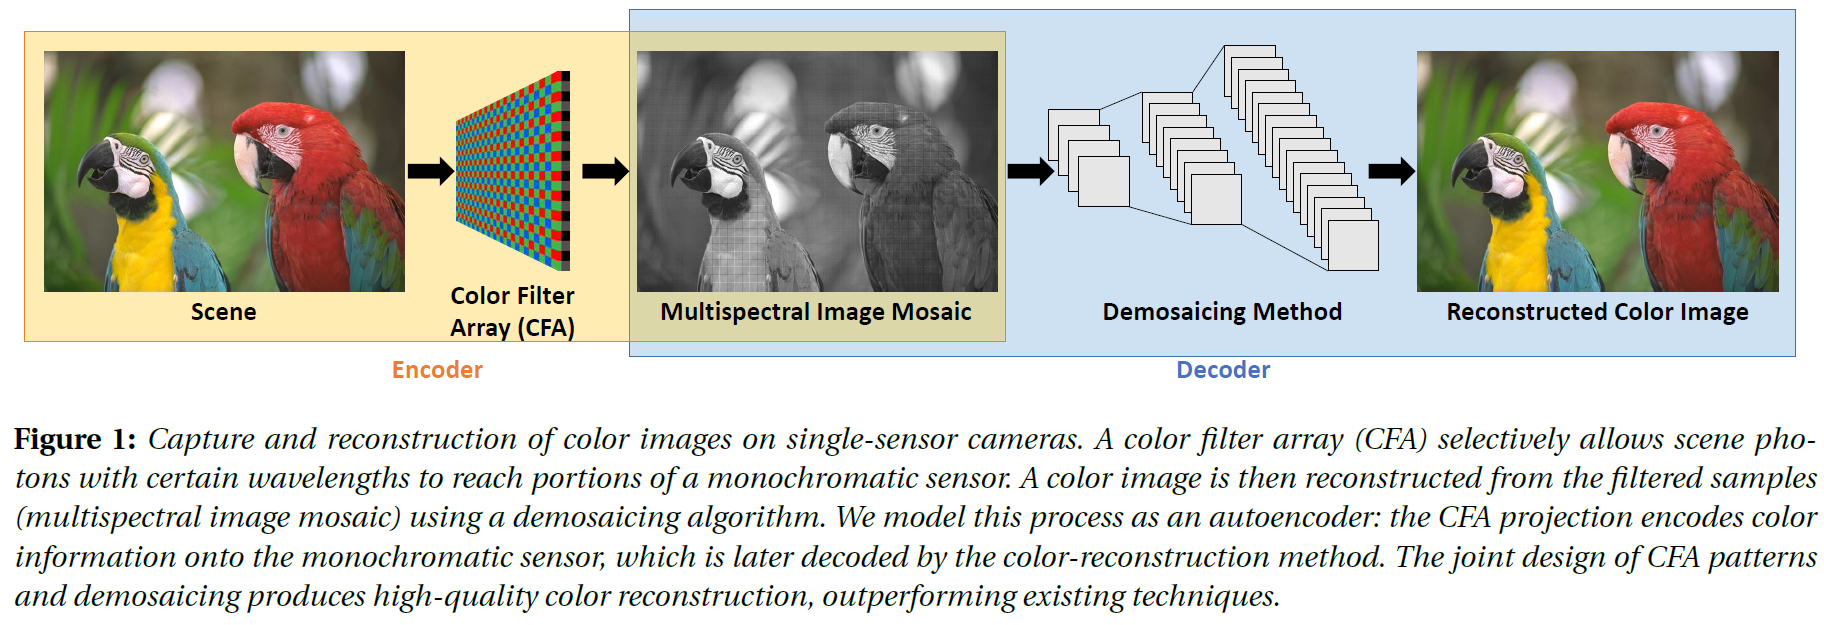 Capture and reconstruction of color images on single-sensor cameras.